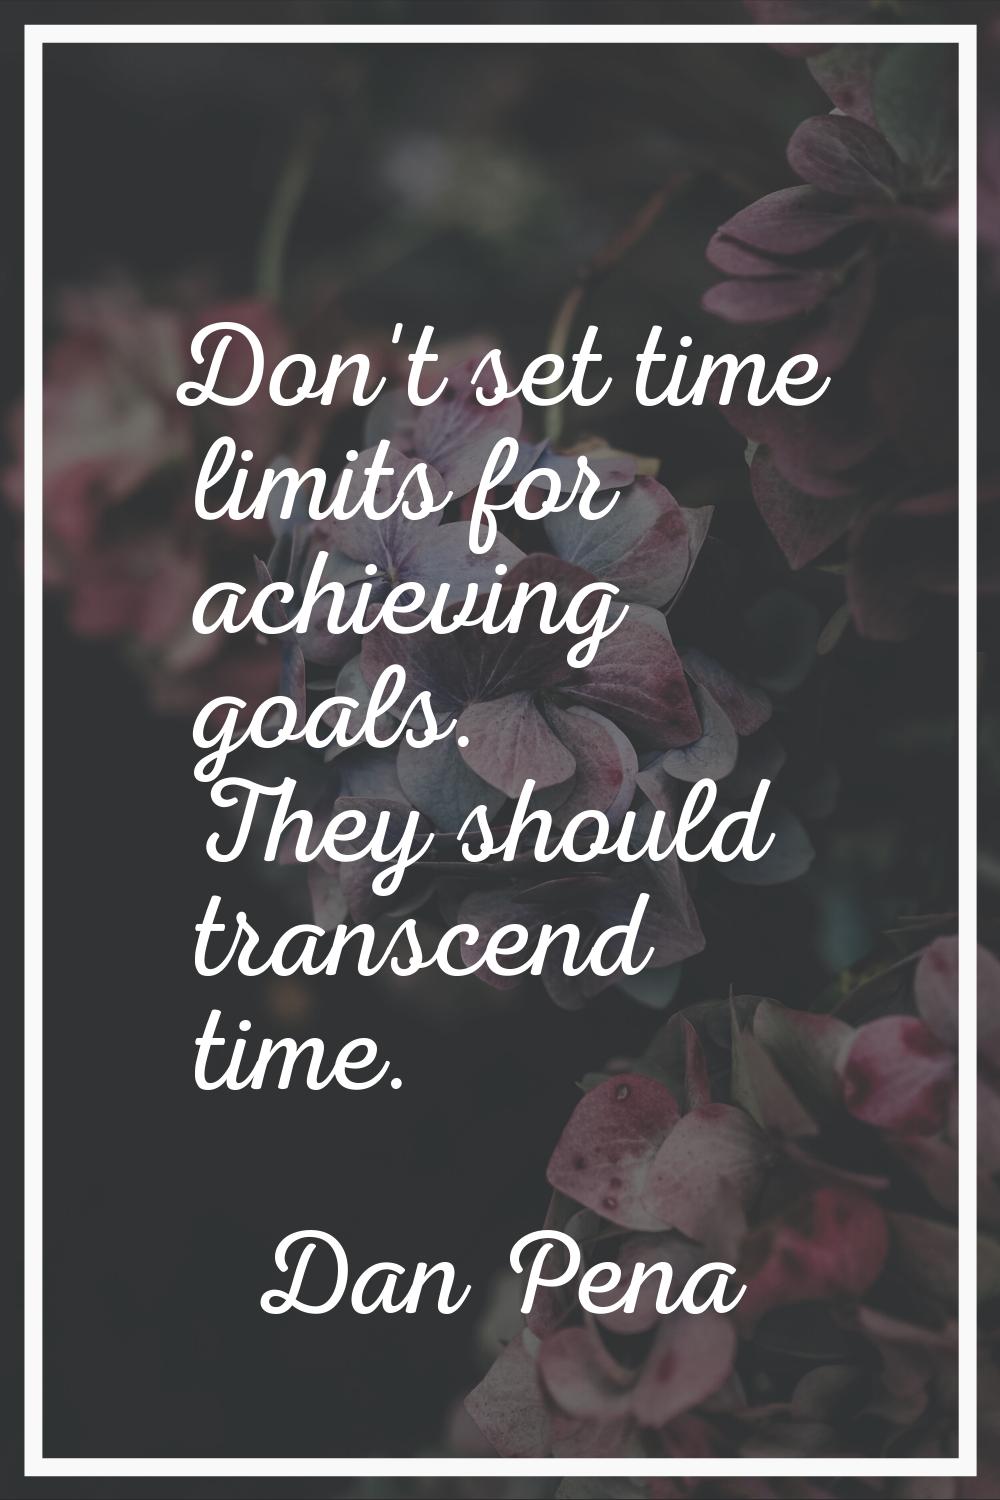 Don't set time limits for achieving goals. They should transcend time.